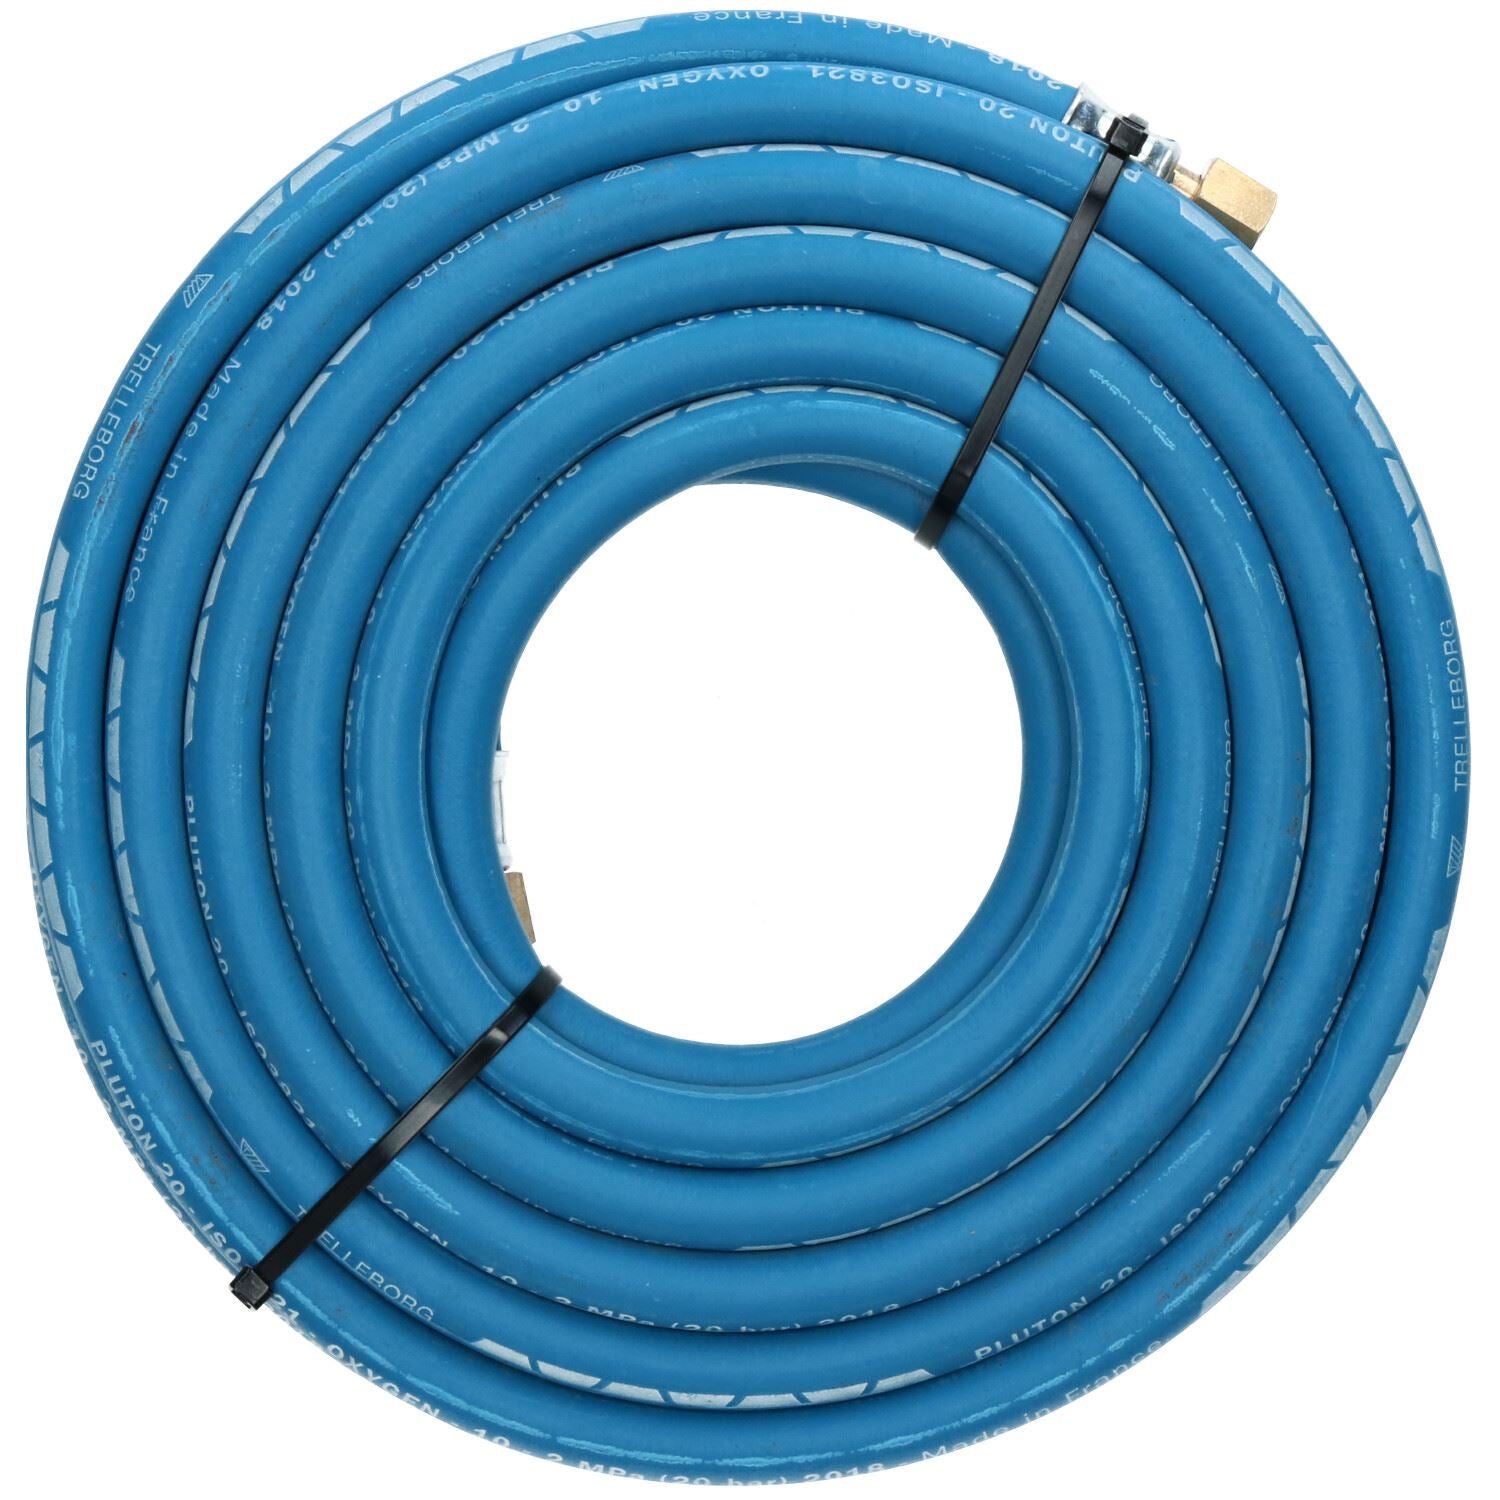 Single Oxygen Fitted Rubber Hose Pipe Cutting & Welding 10M 3/8" BSP Gas Blue